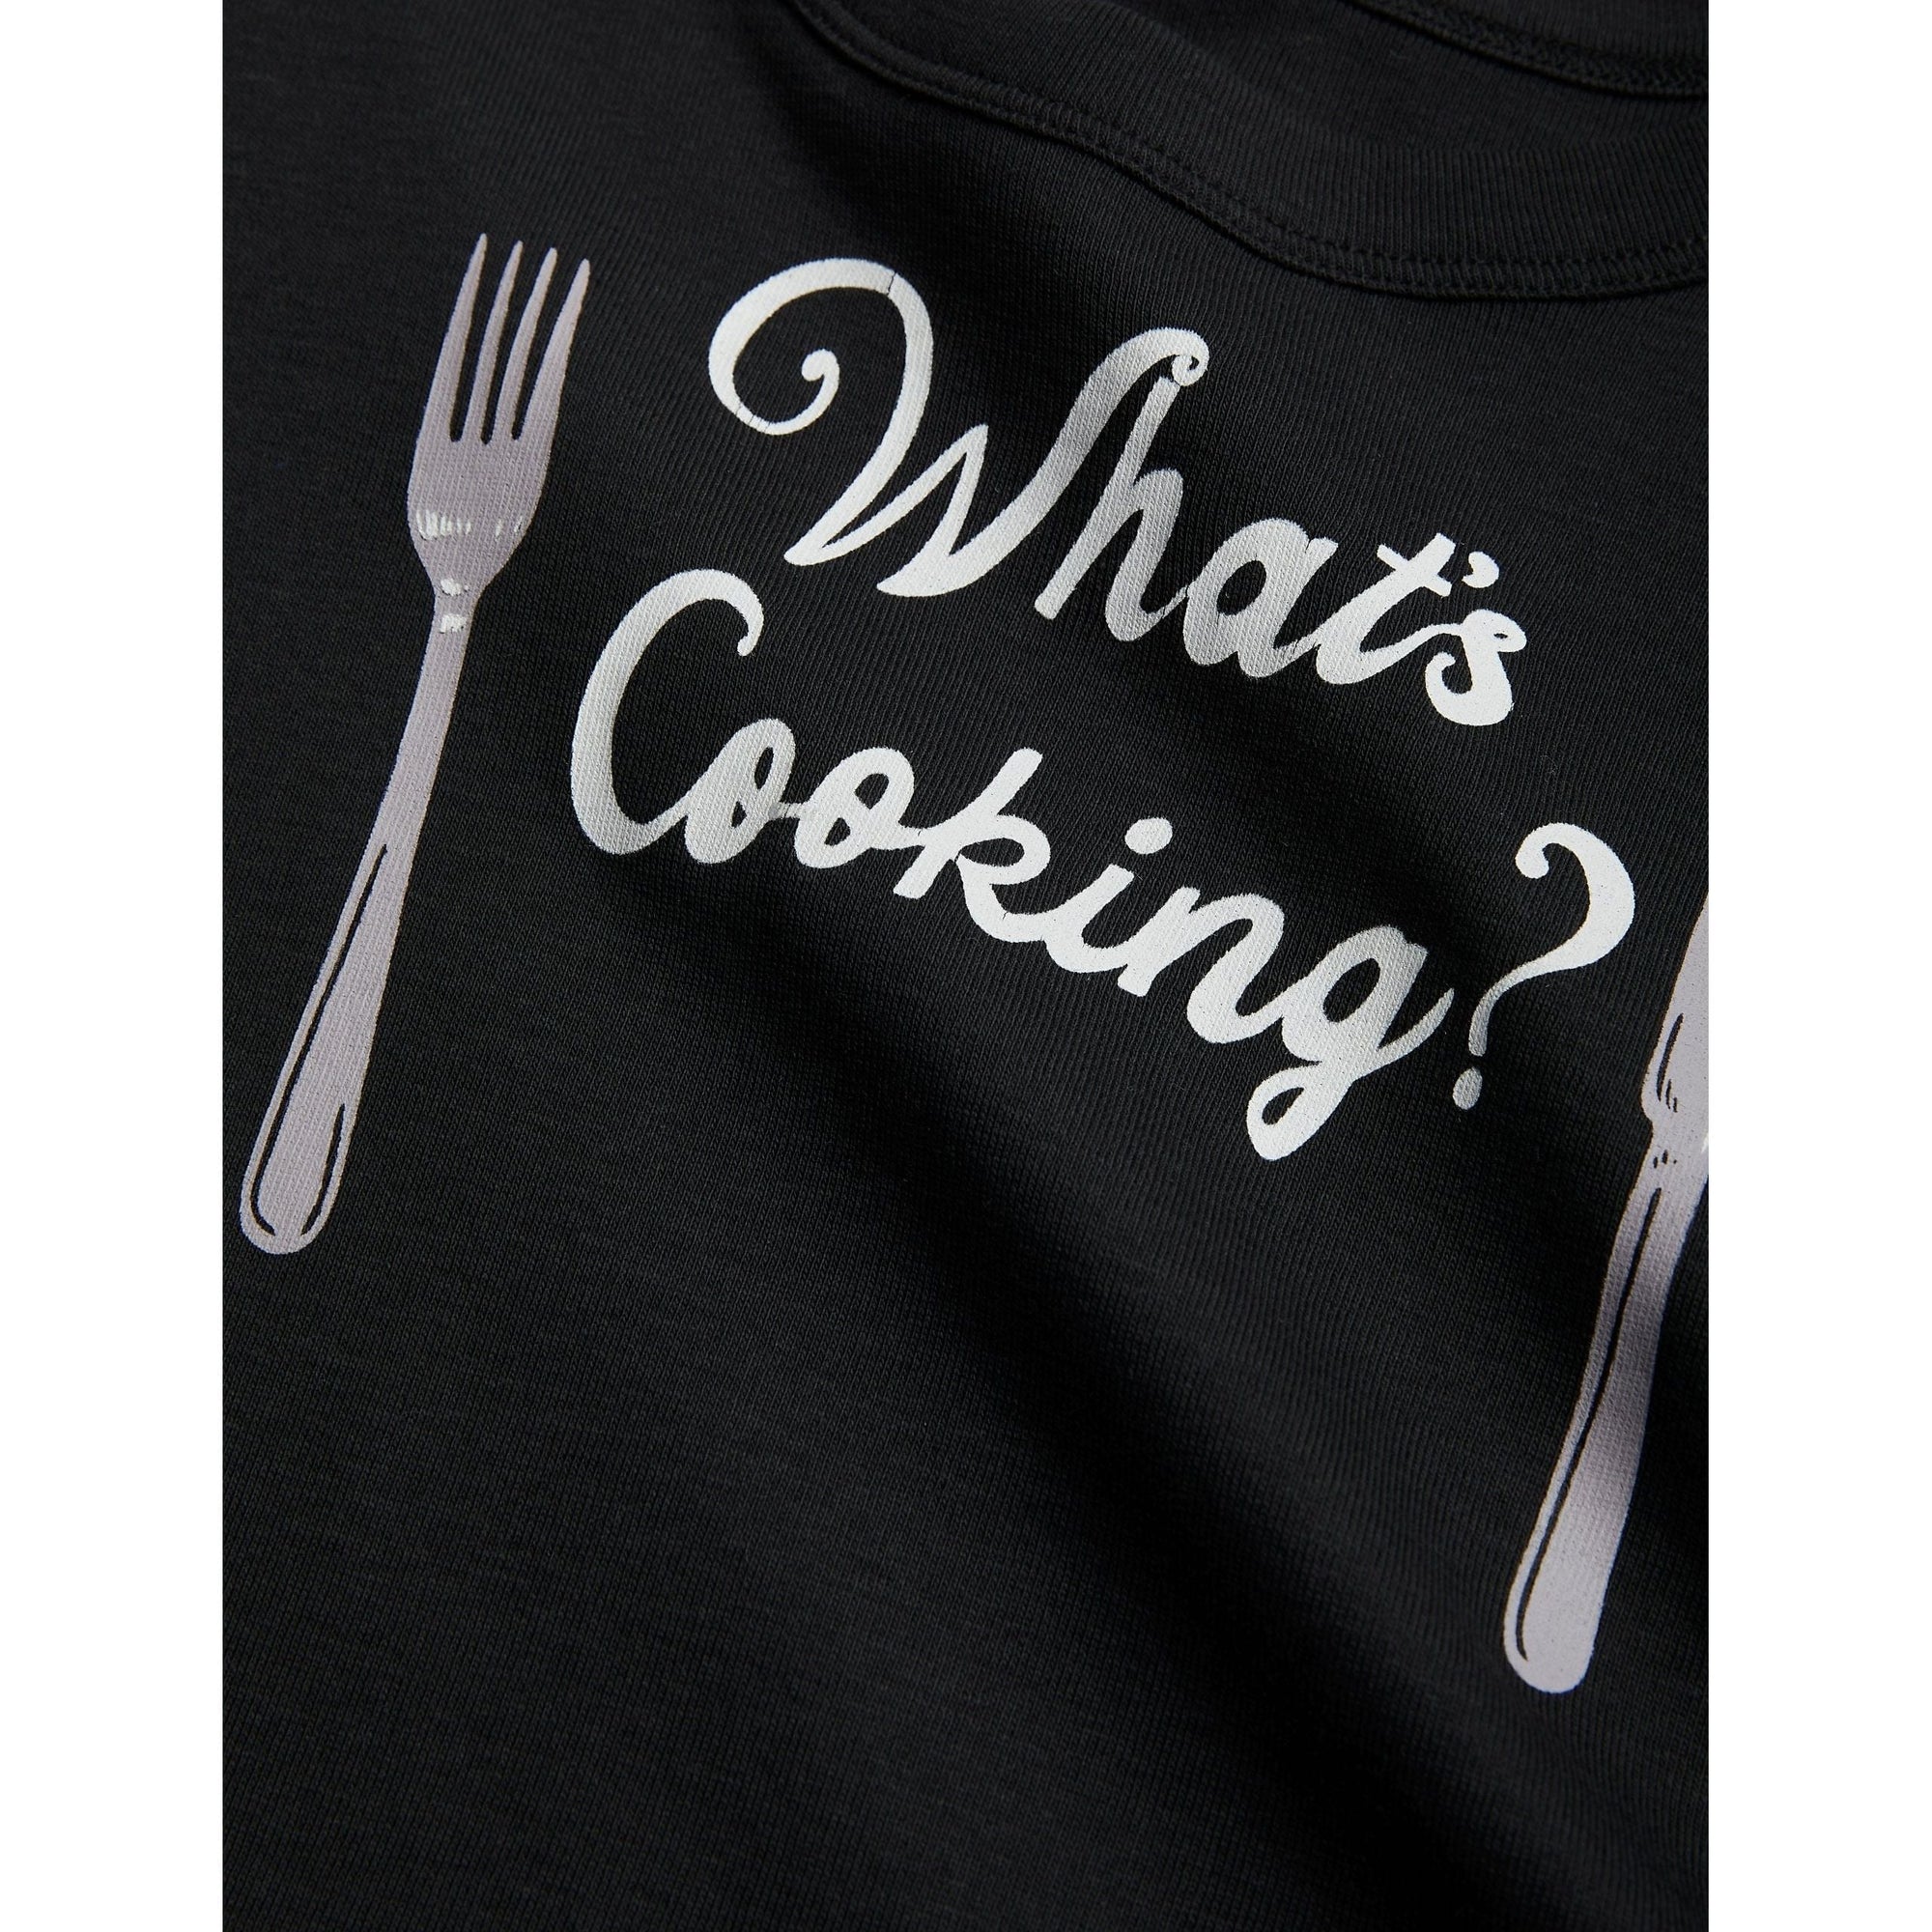 Whats Cooking Sp Ls Tee